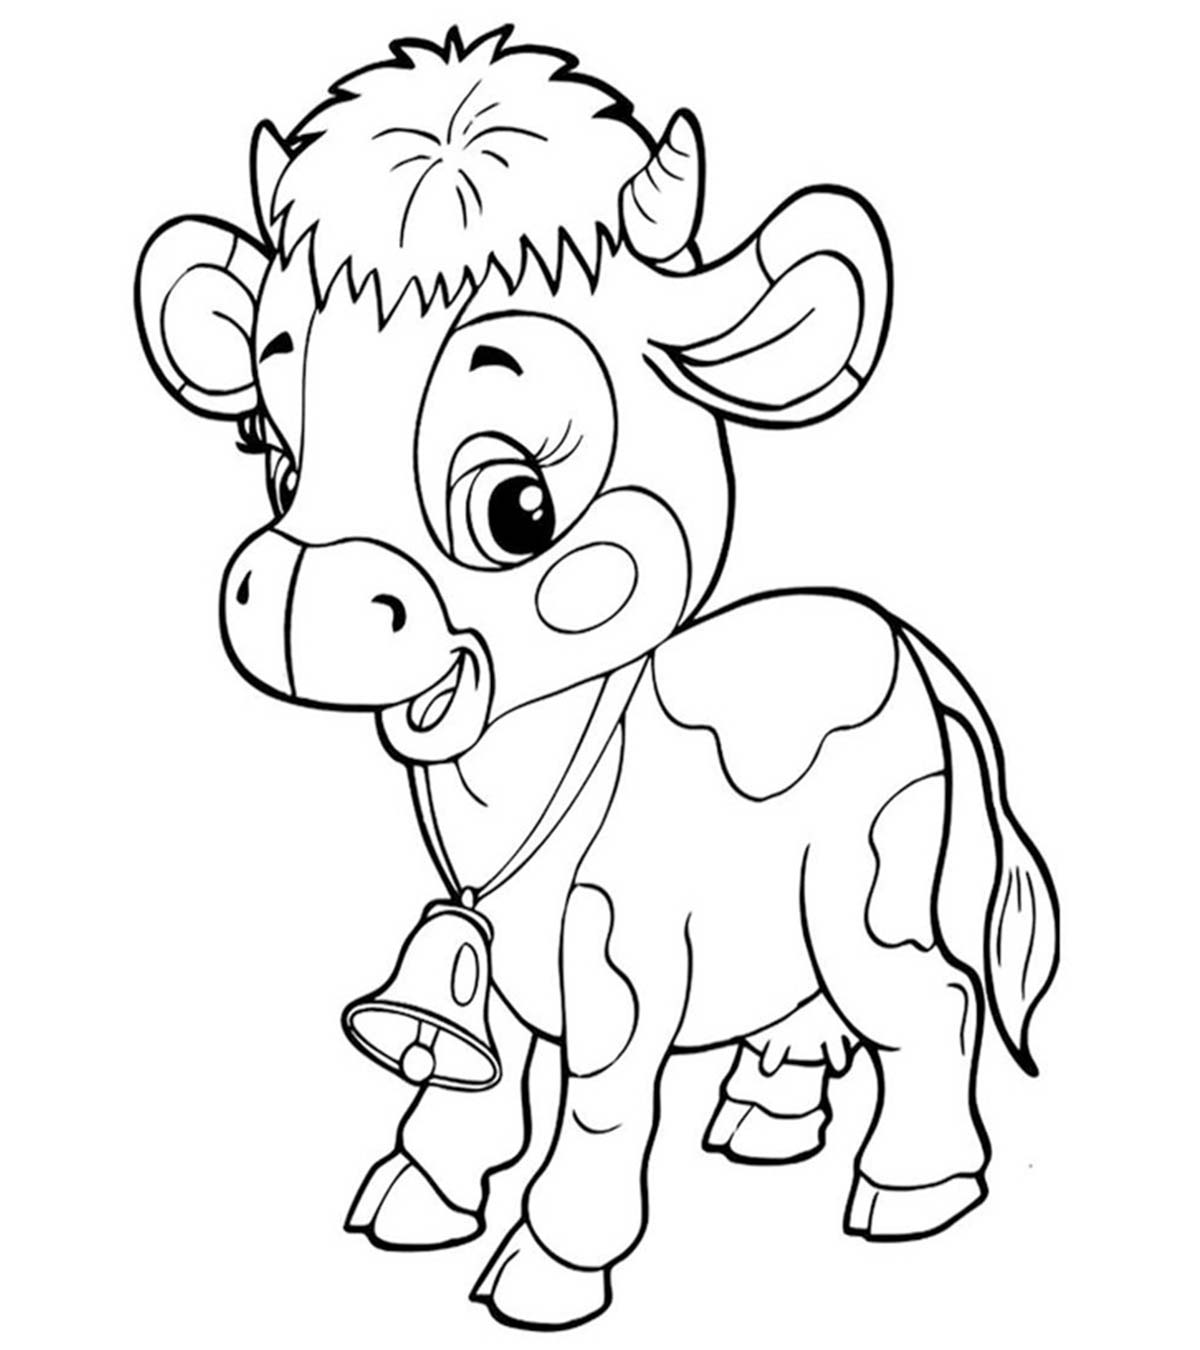 25 Easy Cow Drawing Ideas  How to Draw a Cow  Blitsy